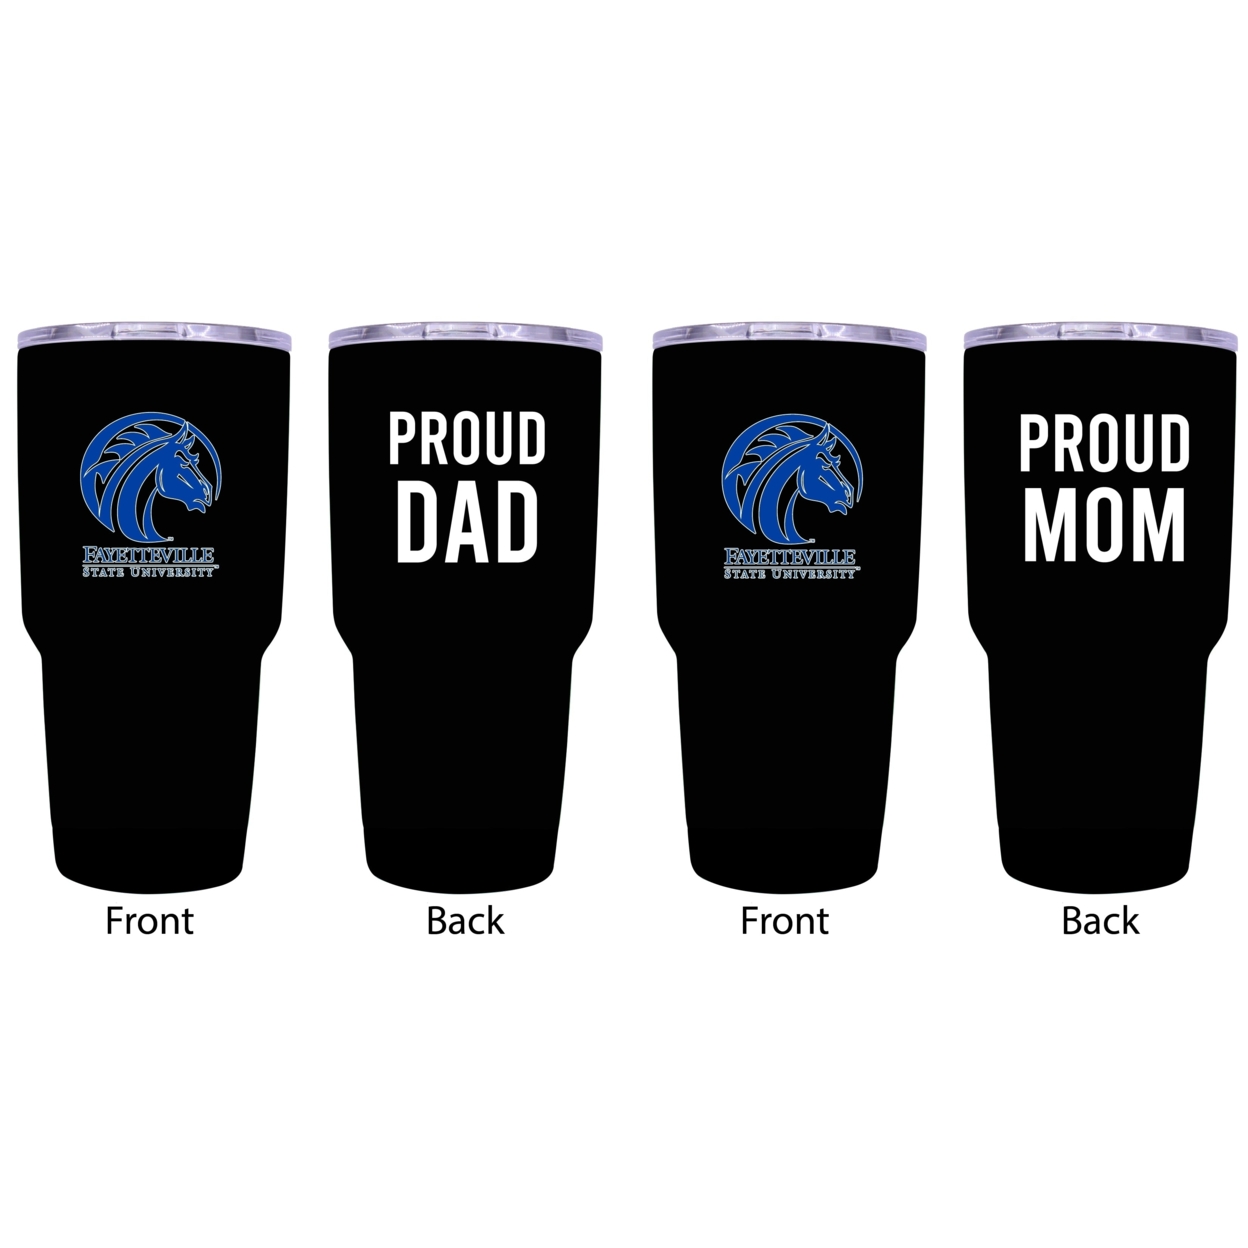 Fayetteville State University Proud Mom And Dad 24 Oz Insulated Stainless Steel Tumblers 2 Pack Black.